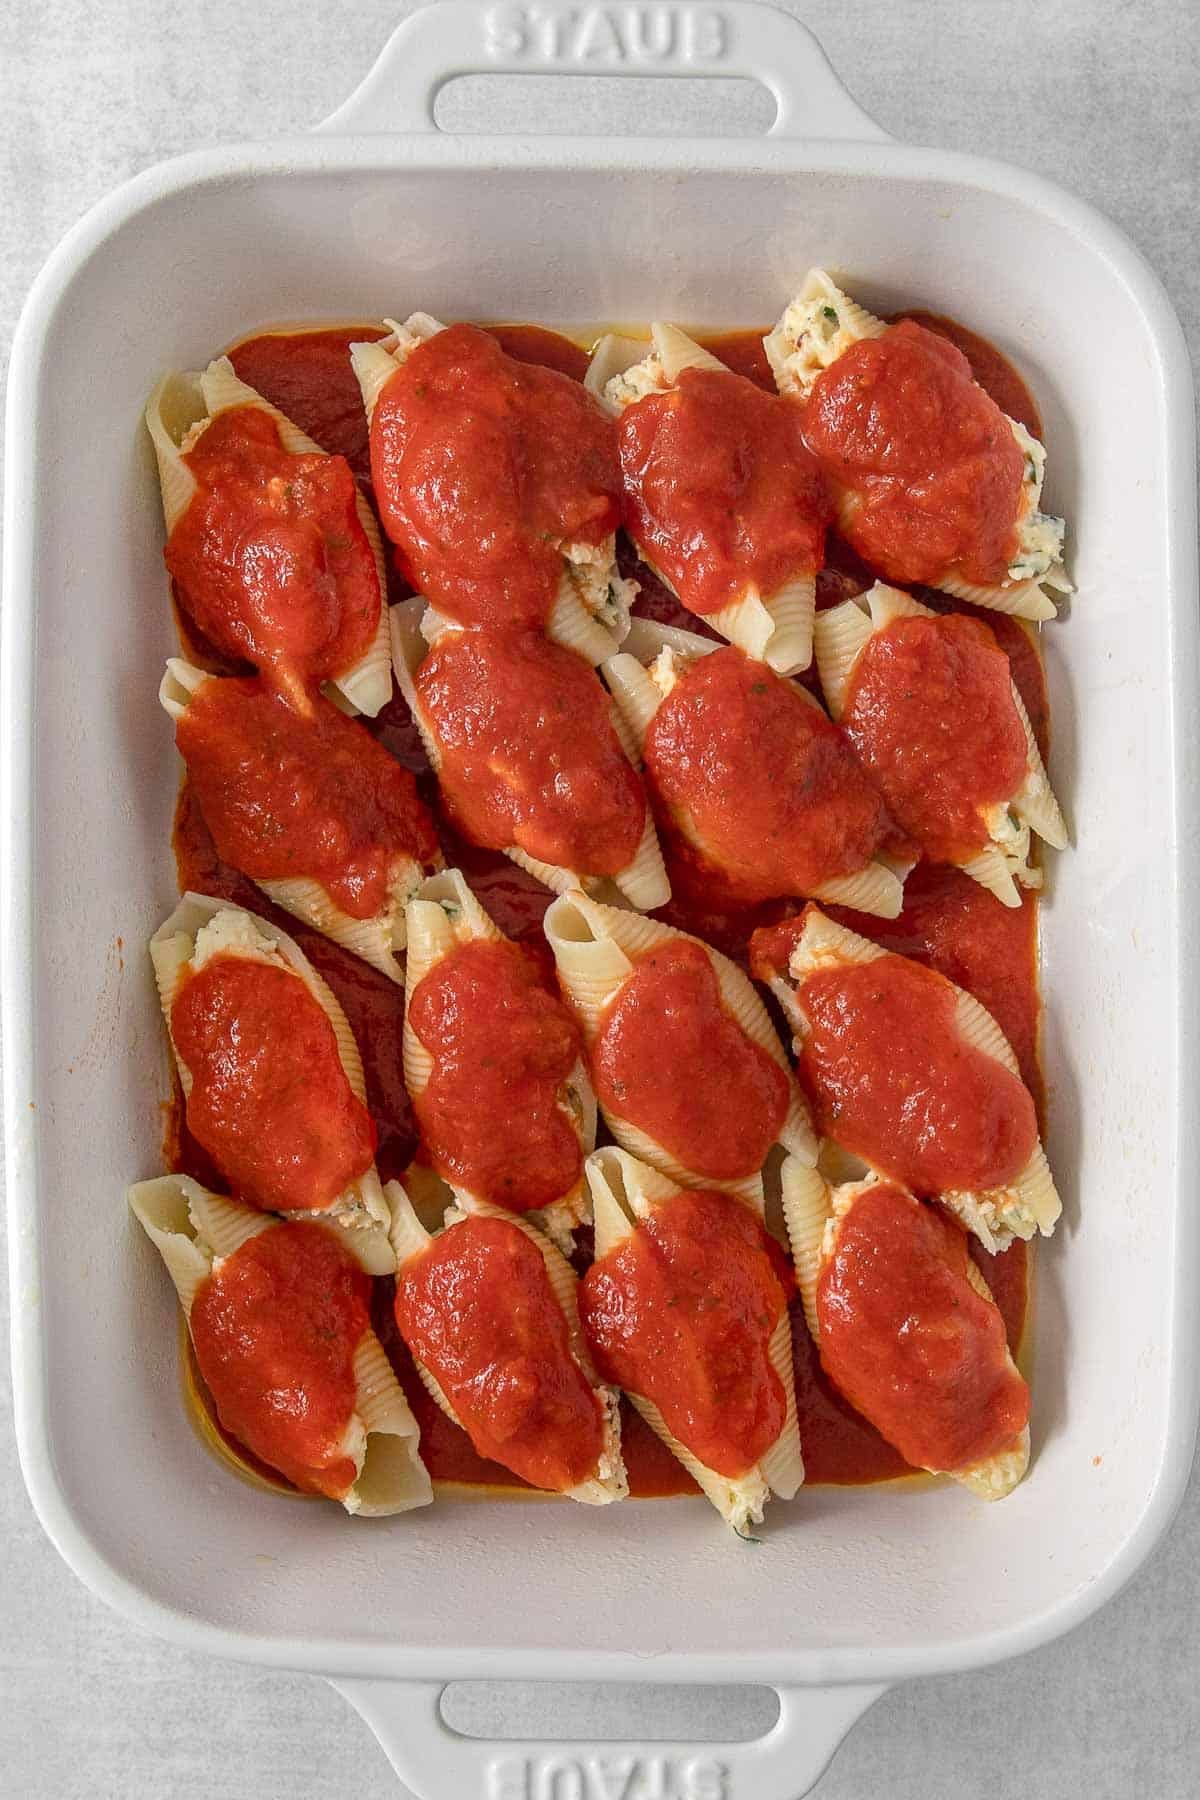 Stuffed shells in large baking dish with sauce drizzled overtop.